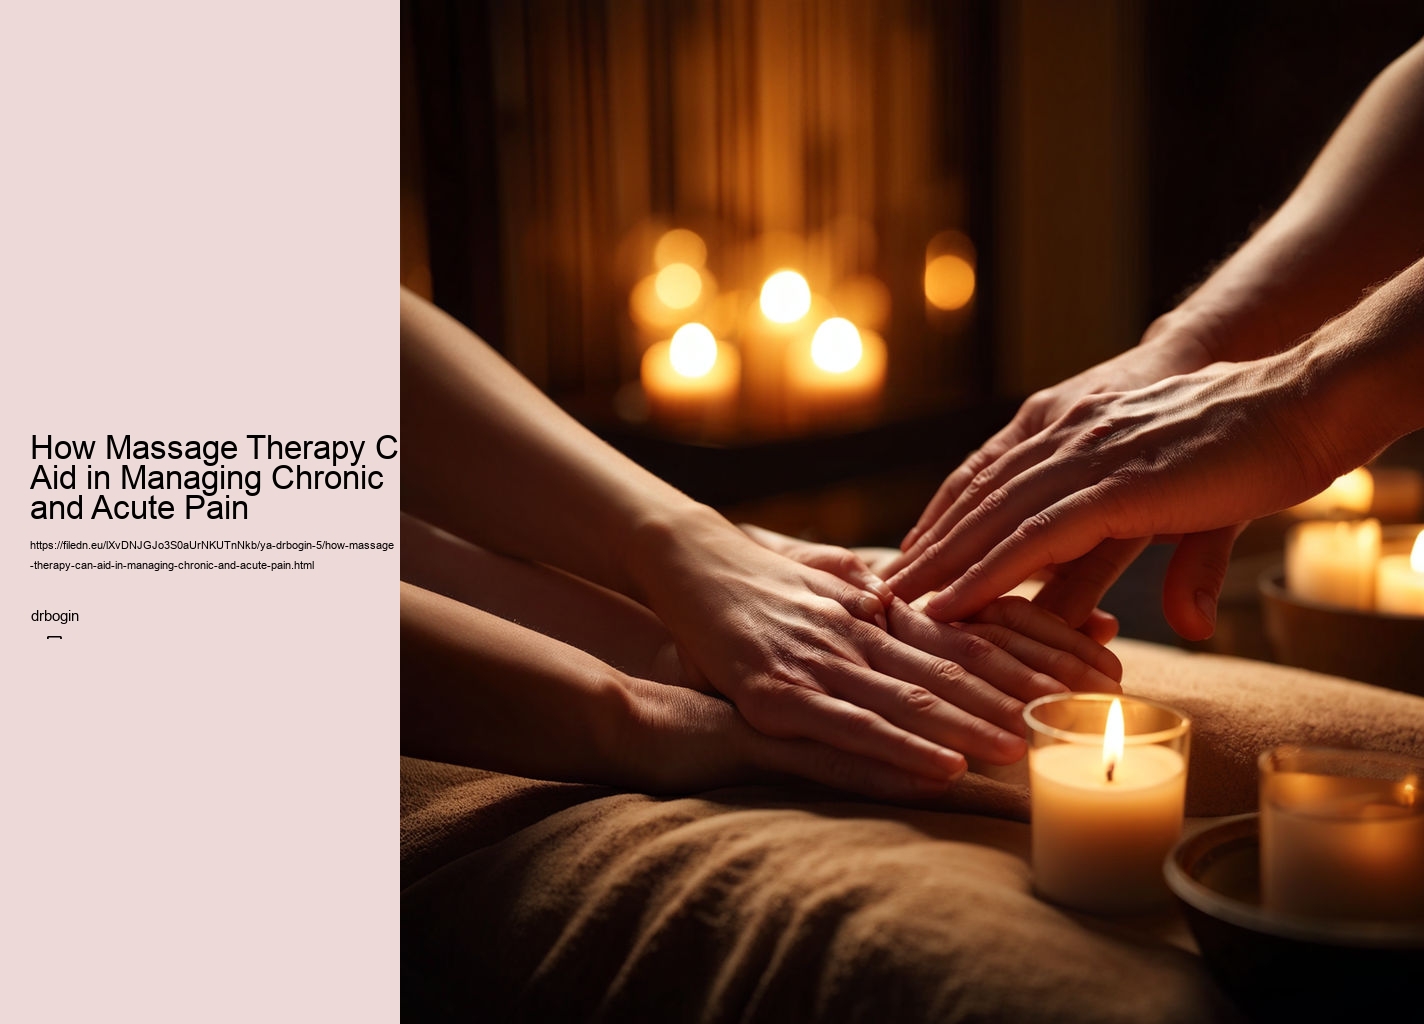 How Massage Therapy Can Aid in Managing Chronic and Acute Pain